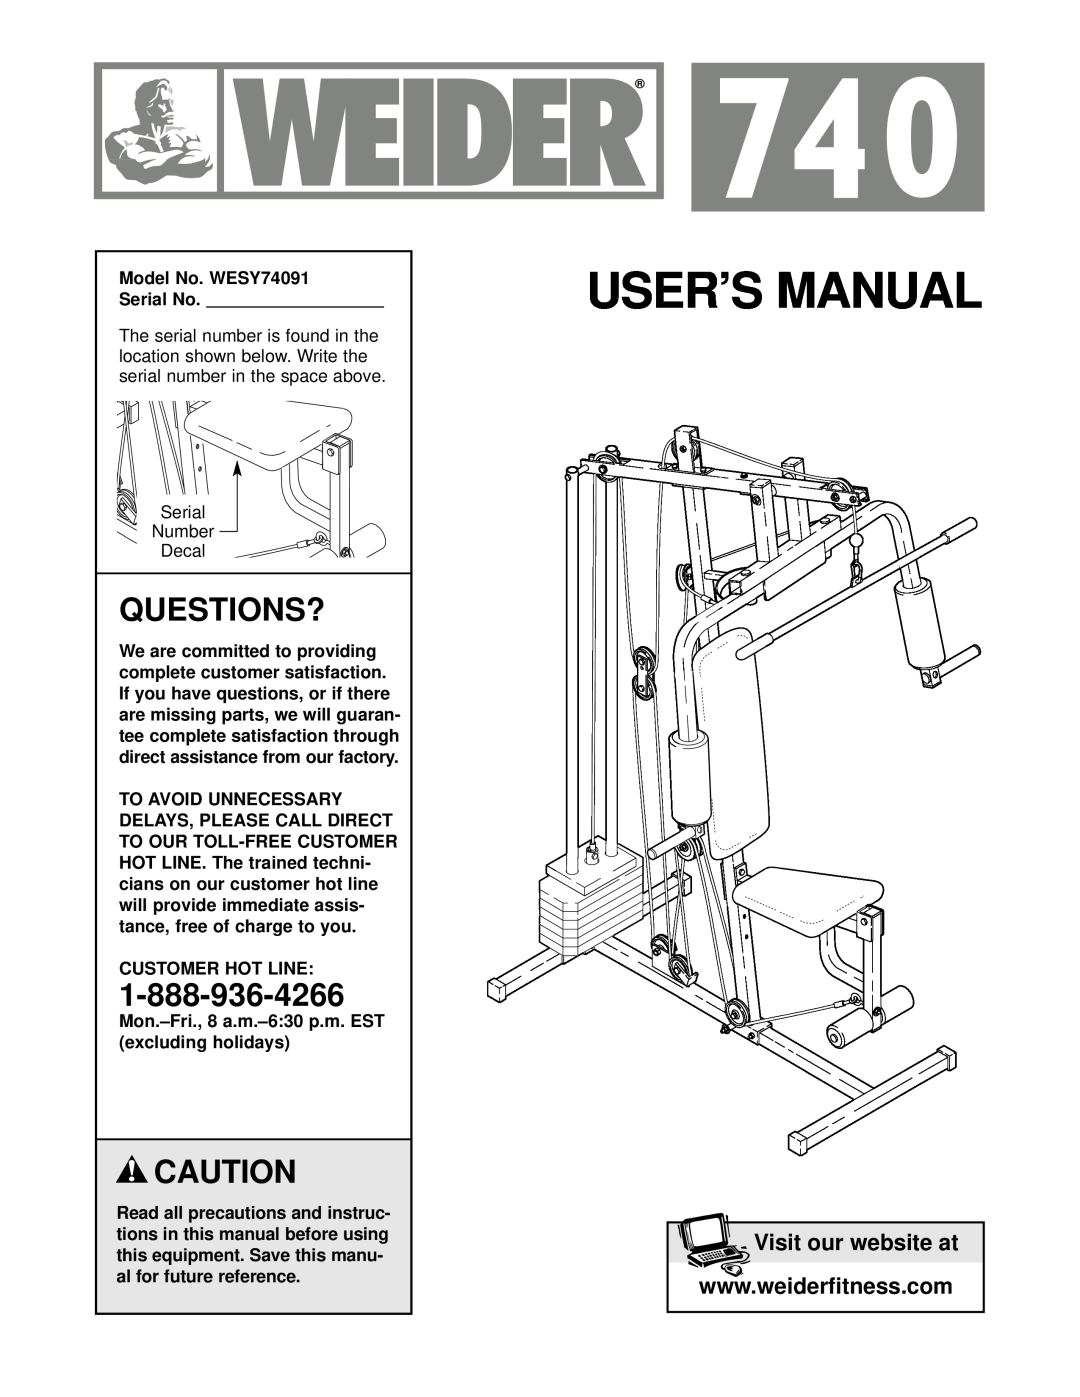 Weider user manual Questions?, User’S Manual, Visit our website at, Model No. WESY74091 Serial No, Customer Hot Line 